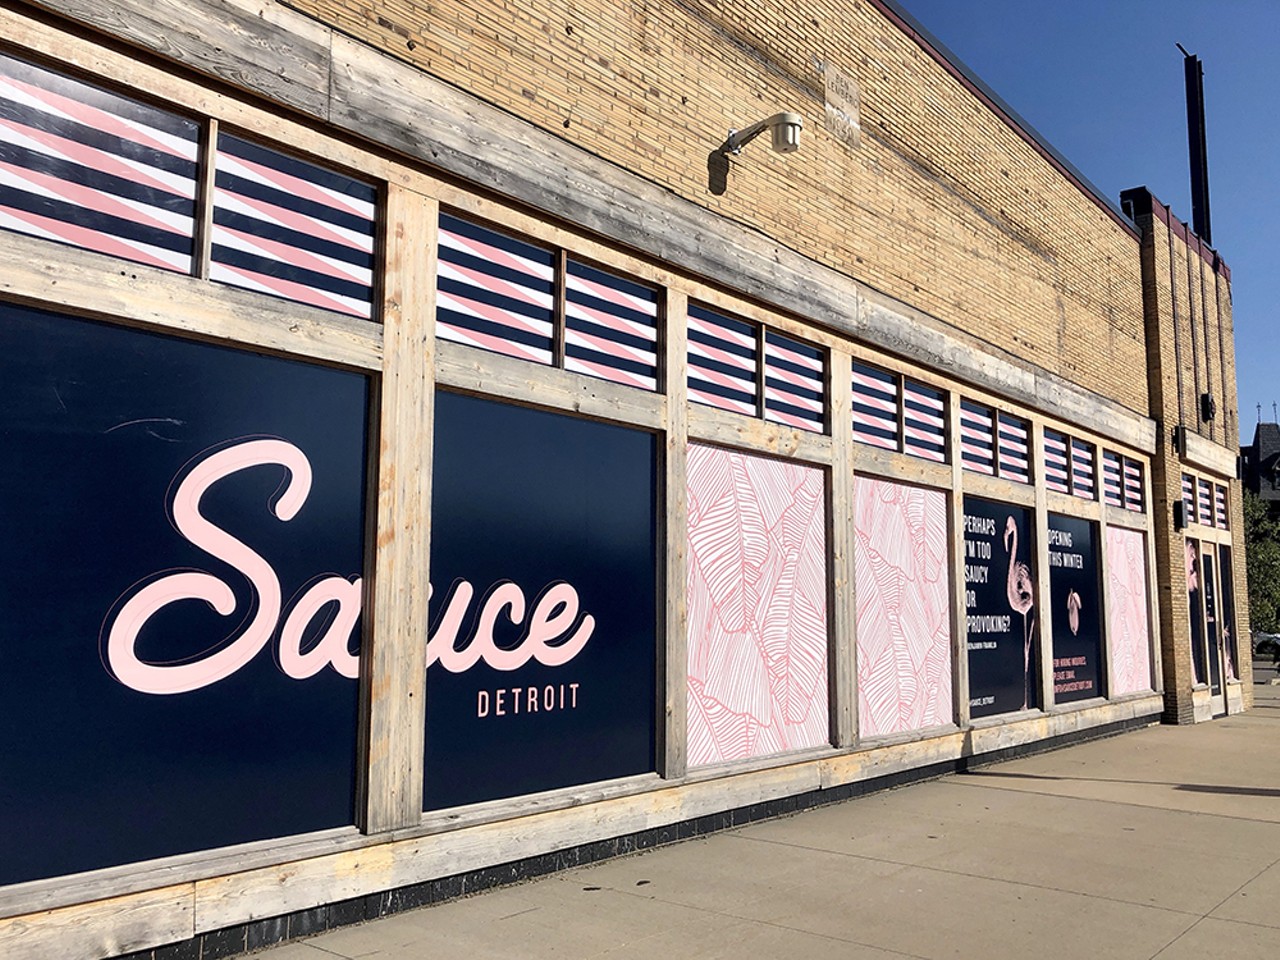 Sauce
4120 Second St., Detroit; saucedetroit.com
After a previous target opening of late 2021 passed, it seems likely that this Italian- and SoCal-themed spot will open this year. Sauce is under the Heirloom Hospitality group, helmed by Jeremy Sasson (Prime + Proper, a Detroit and Birmingham&#146;s Townhouse), and will feature a menu by former Otus Supply chef Myles McVay. 
Photo by Steve Neavling